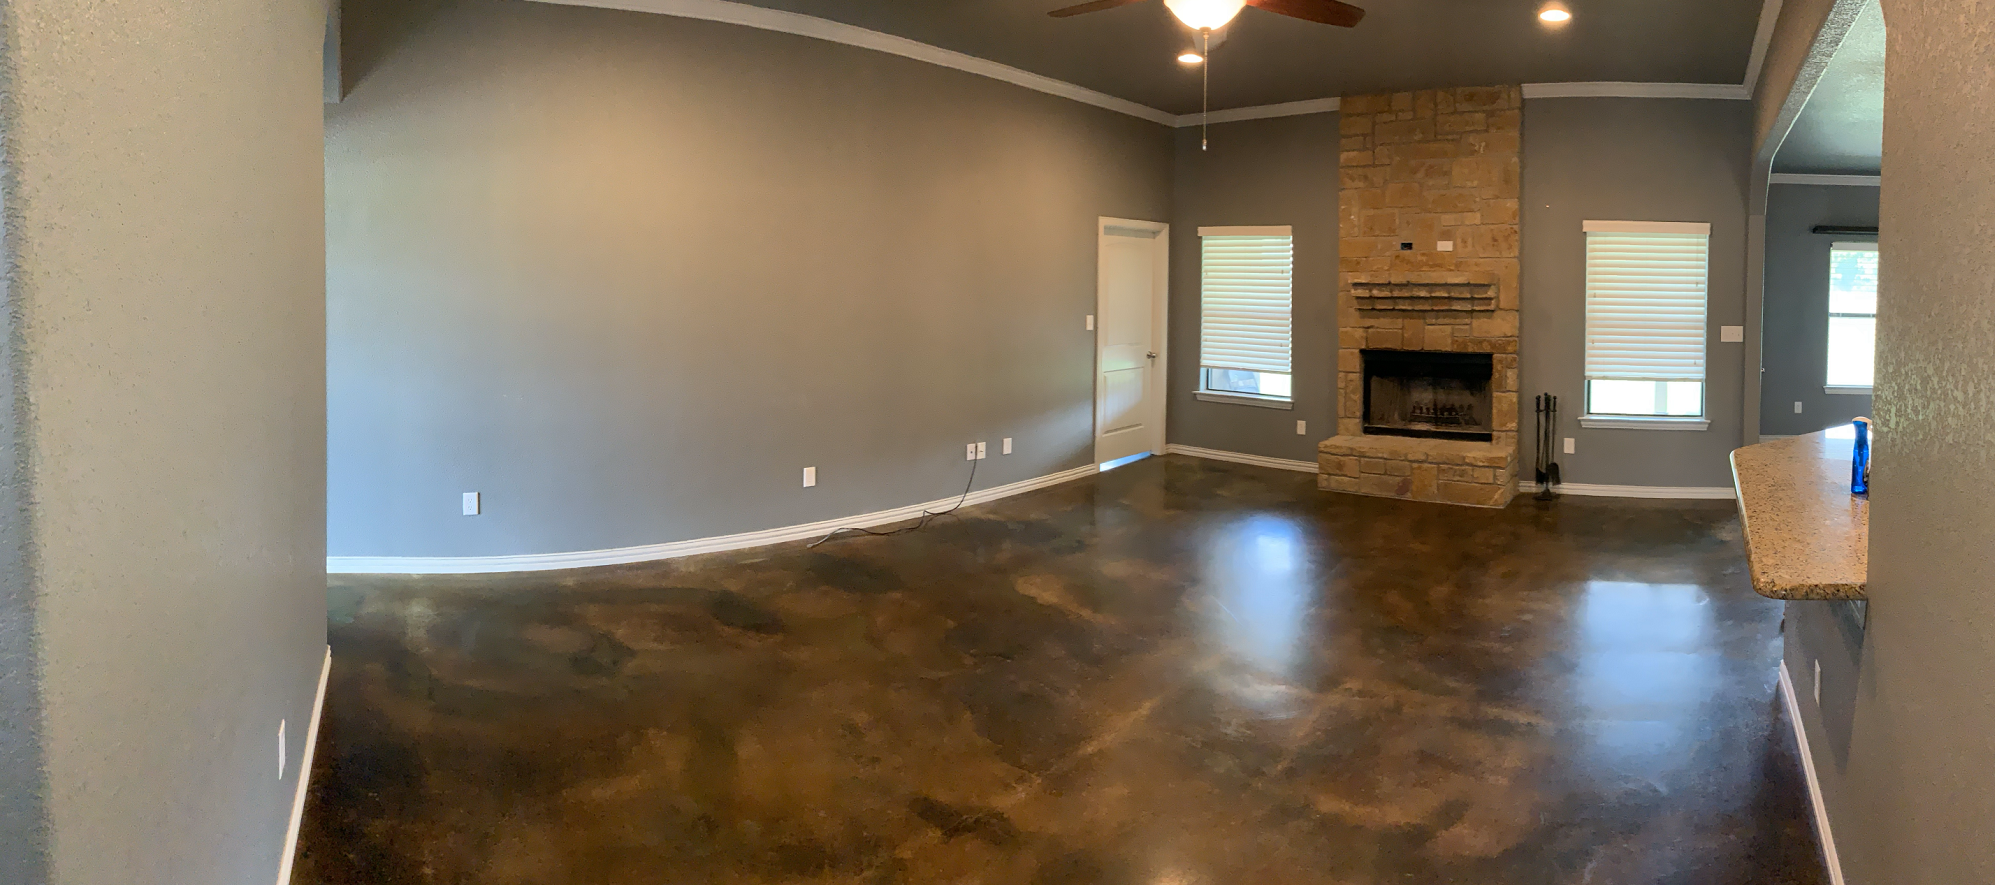 Interior Painting in Millsap, TX After